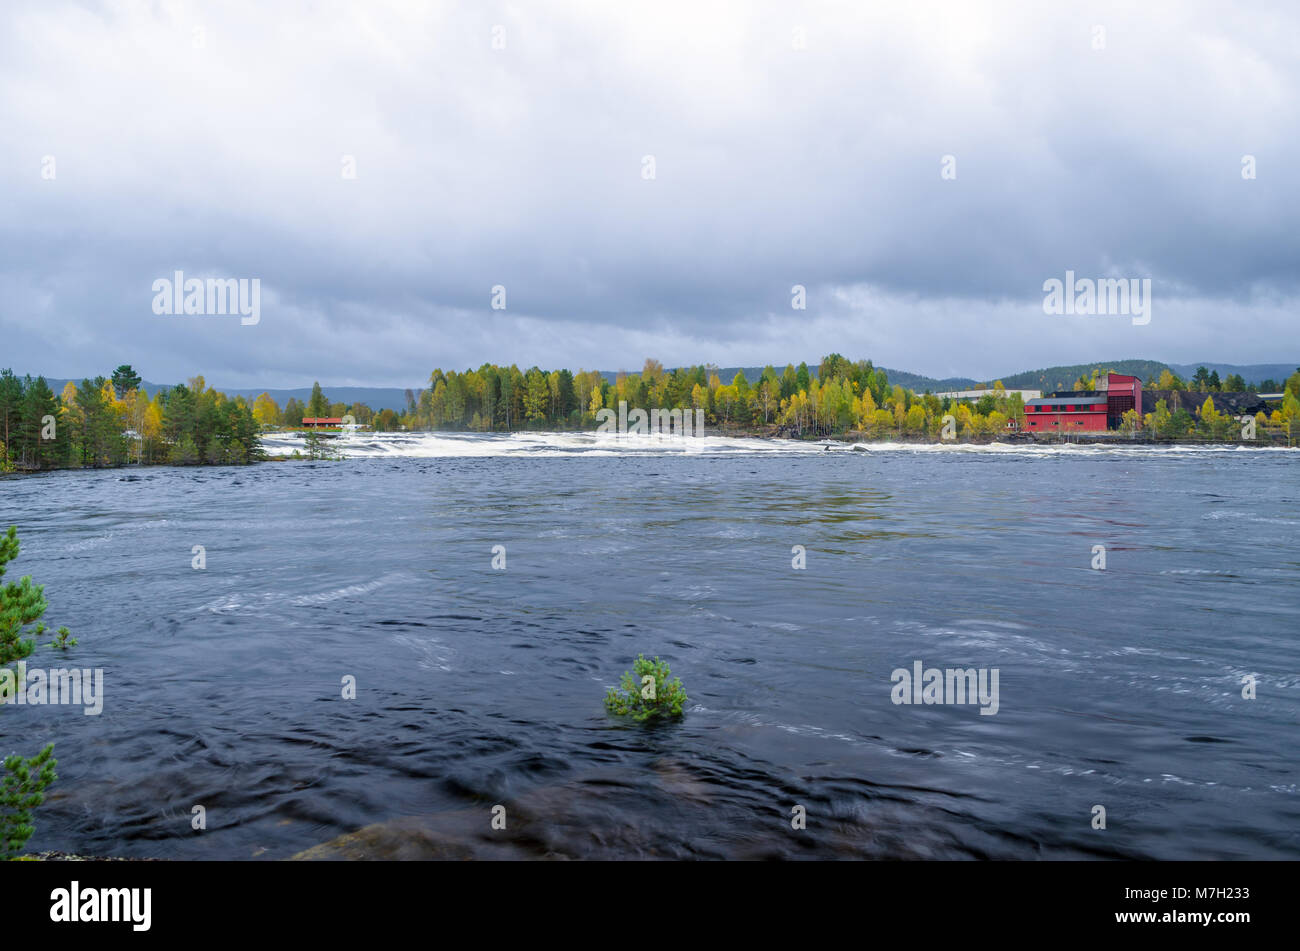 Fennefoss- waterfall on Otra river in Evje, central Norway. Stock Photo